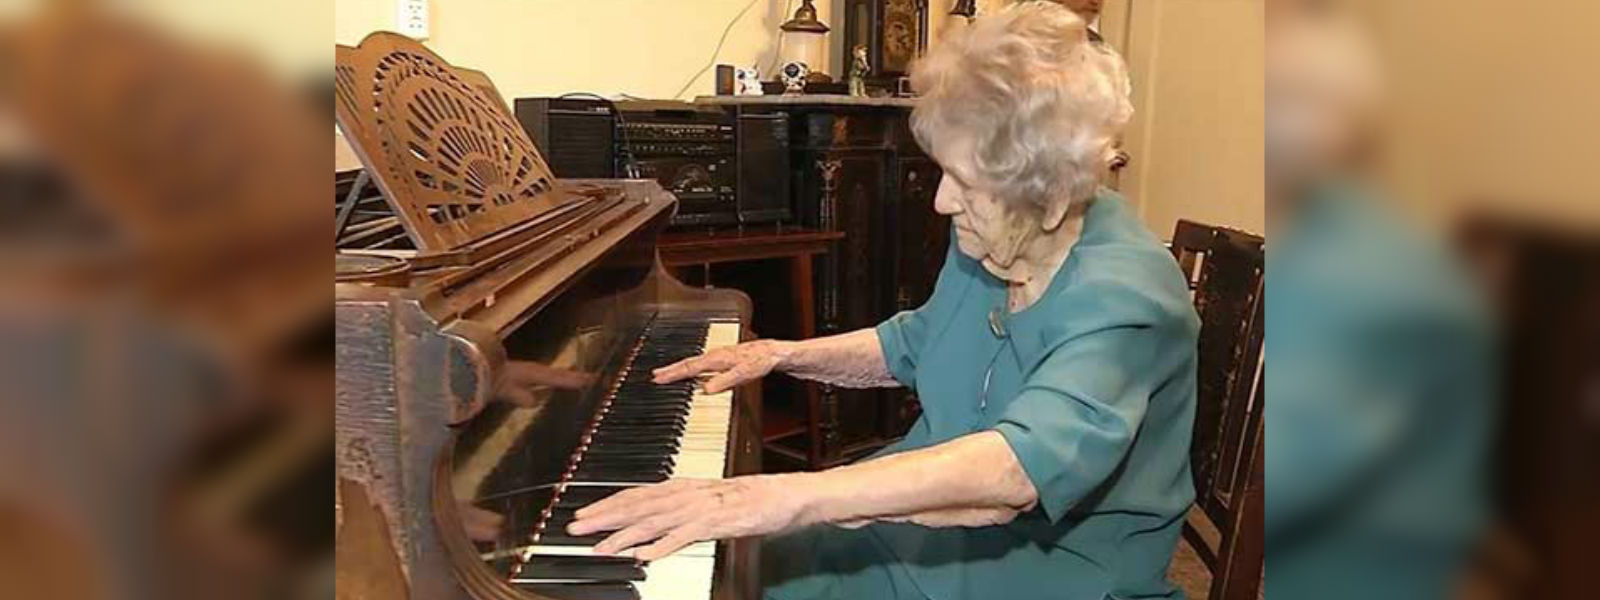 108-year-old pianist doesn’t let age stop her playing